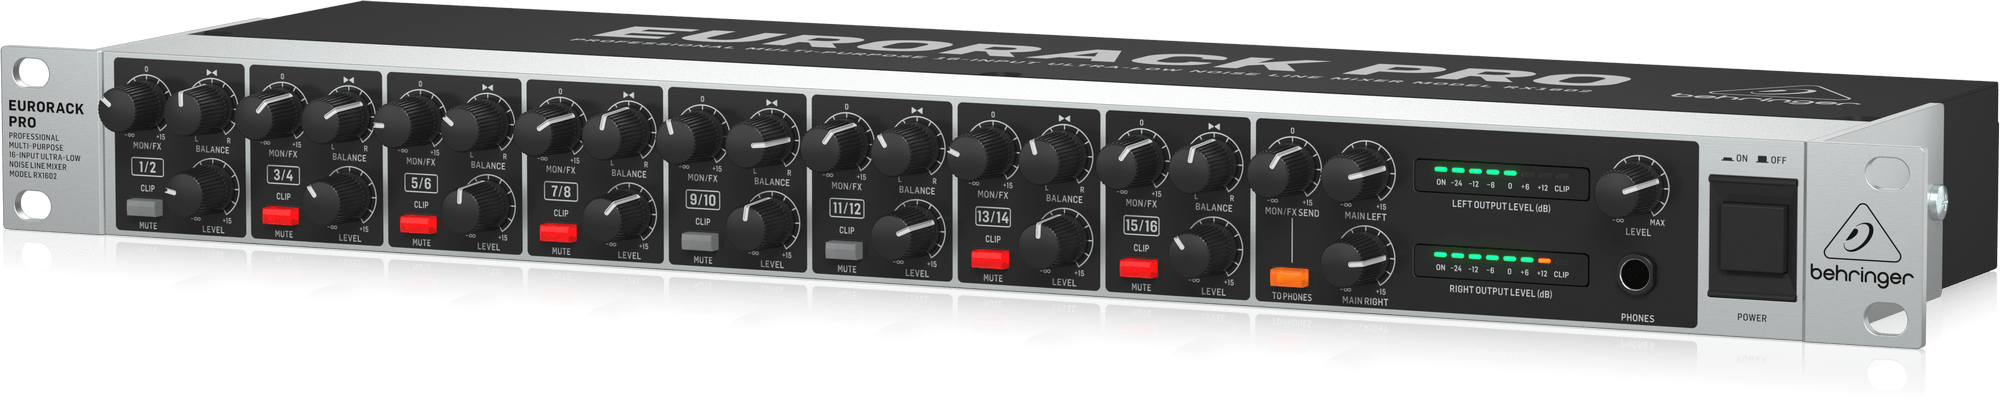 Behringer | Product | RX1602